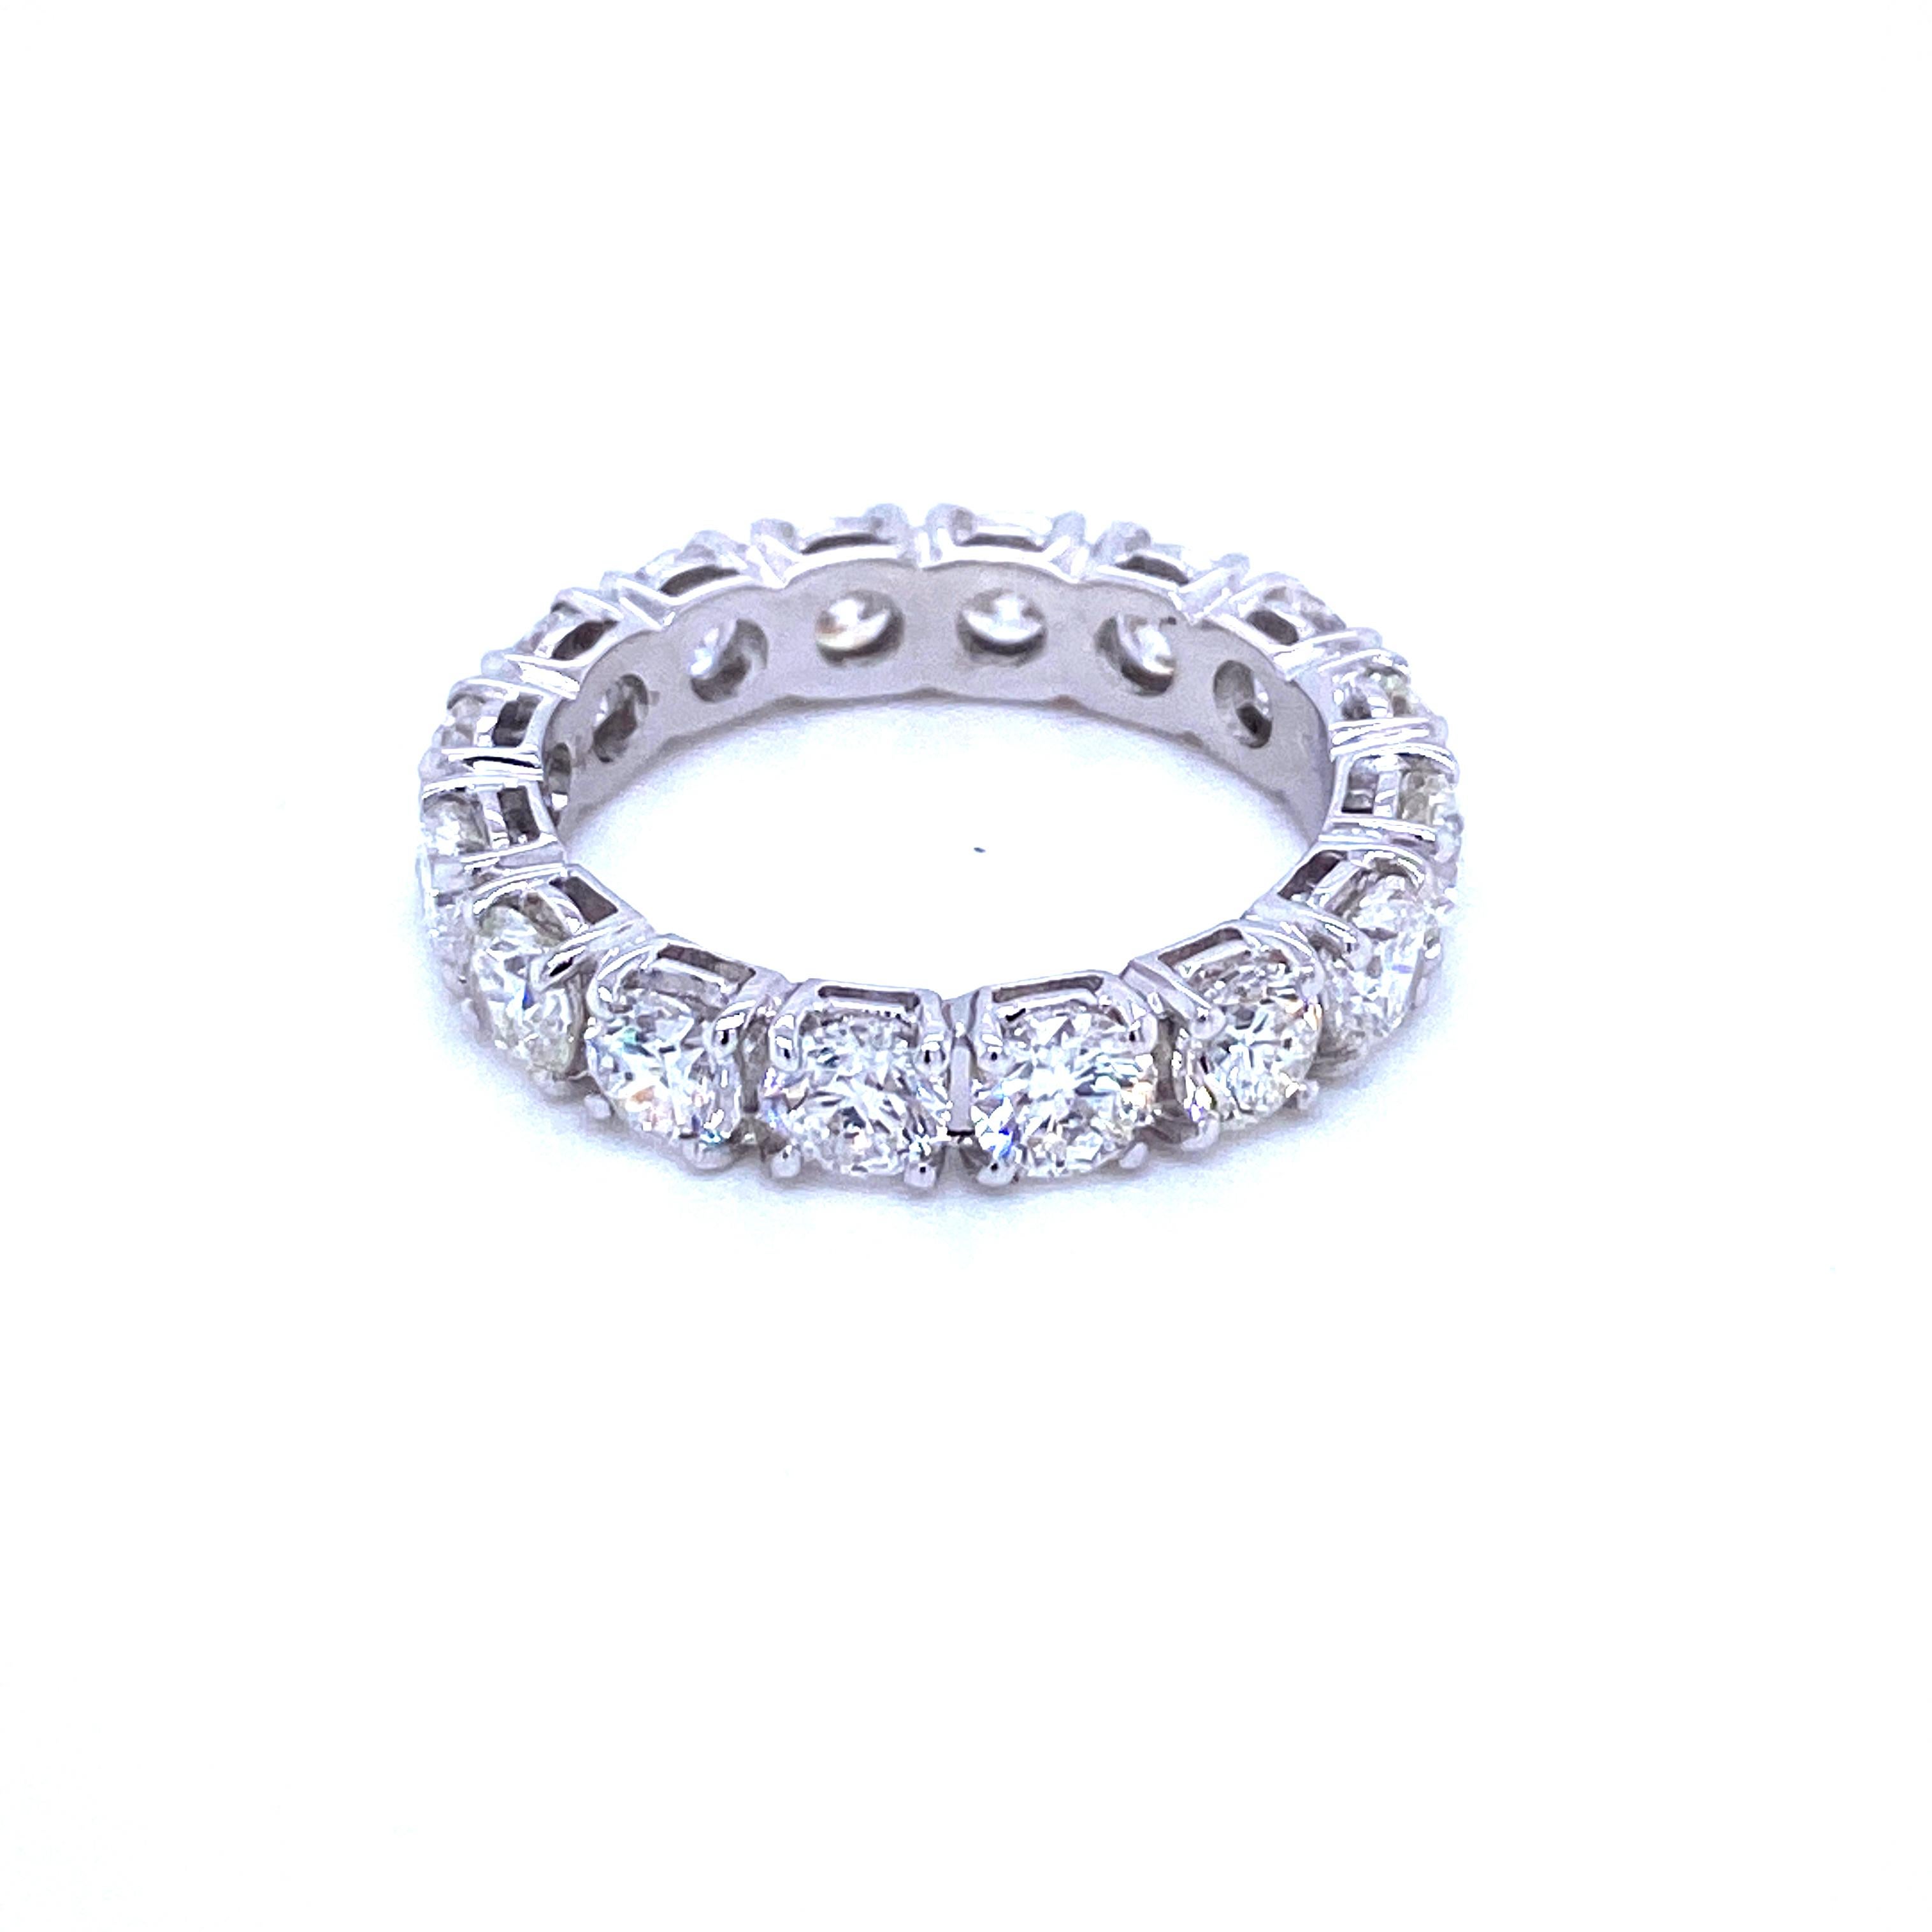 Amazing brand new eternity ring made in solid 18k white gold and set with 4 Carats of sparkling round brilliant cut diamonds, 16 diamonds x 0,25 ct, certified G - Vvs2
This piece is designed and crafted in our laboratories, thanks to old techniques